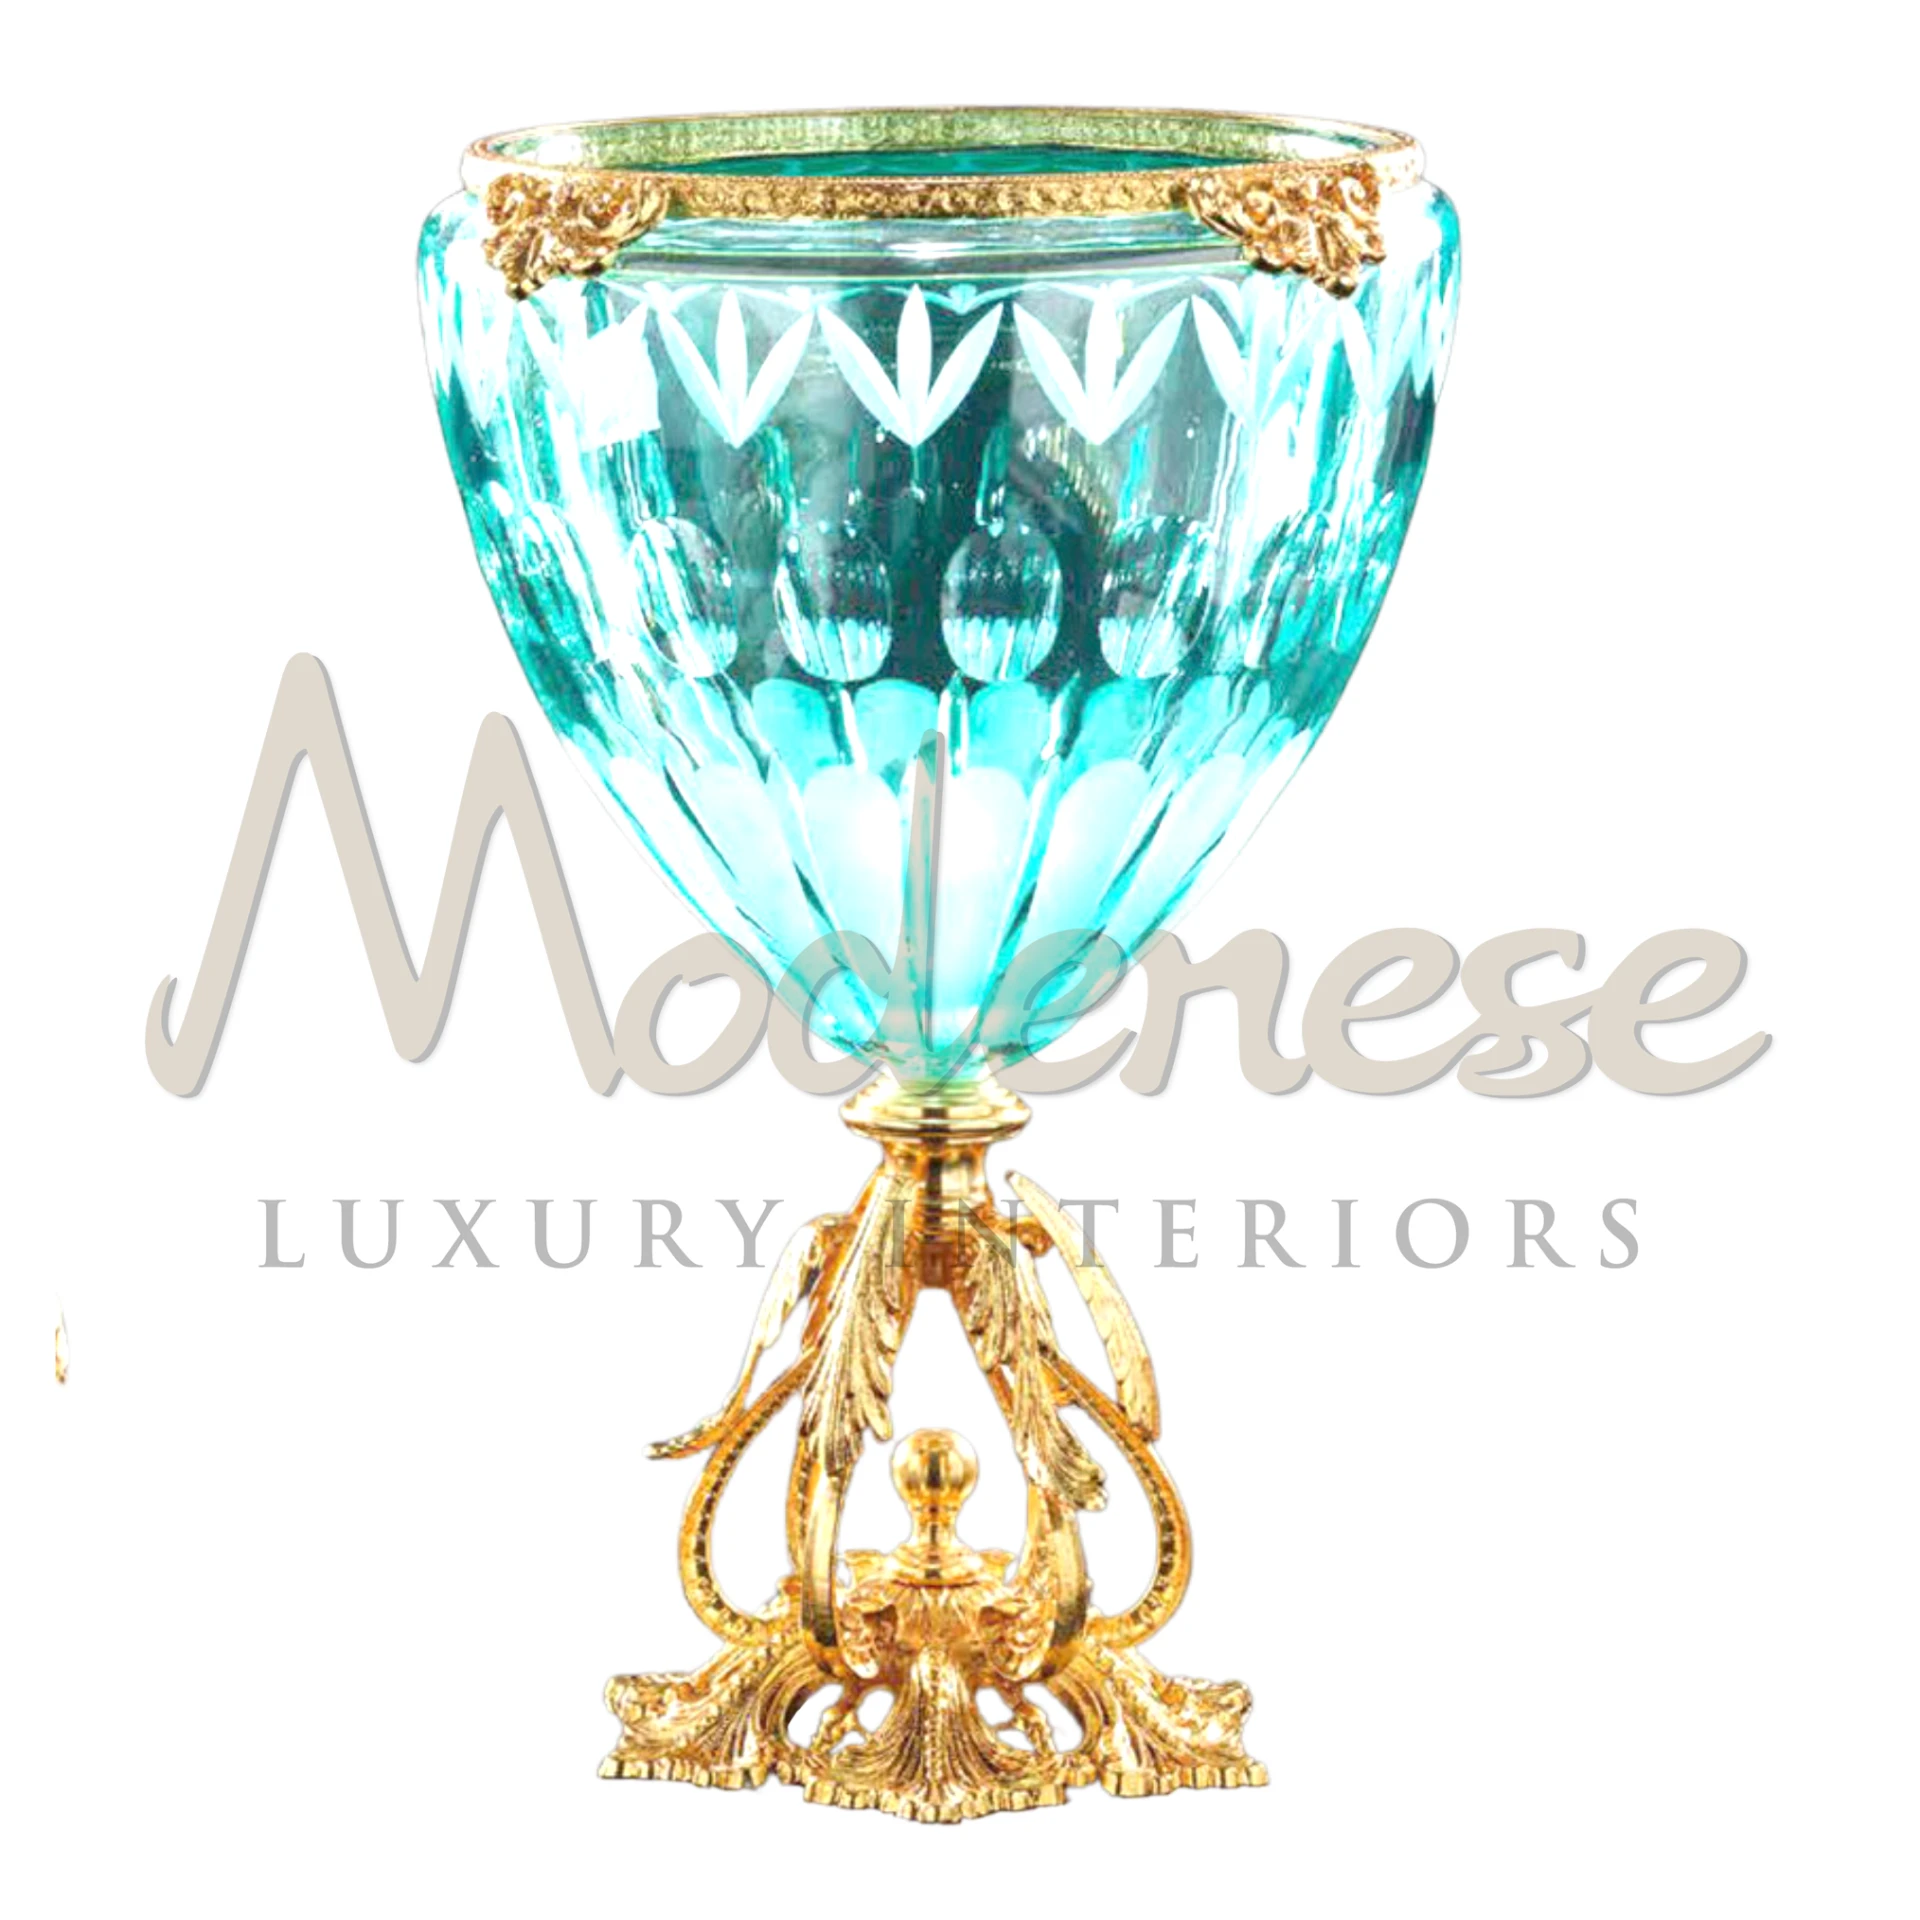 Classical Turquoise Glass Vase, a timeless piece with Greek, Roman, Baroque, or Rococo motifs, perfect for adding historical elegance to luxury interiors.






